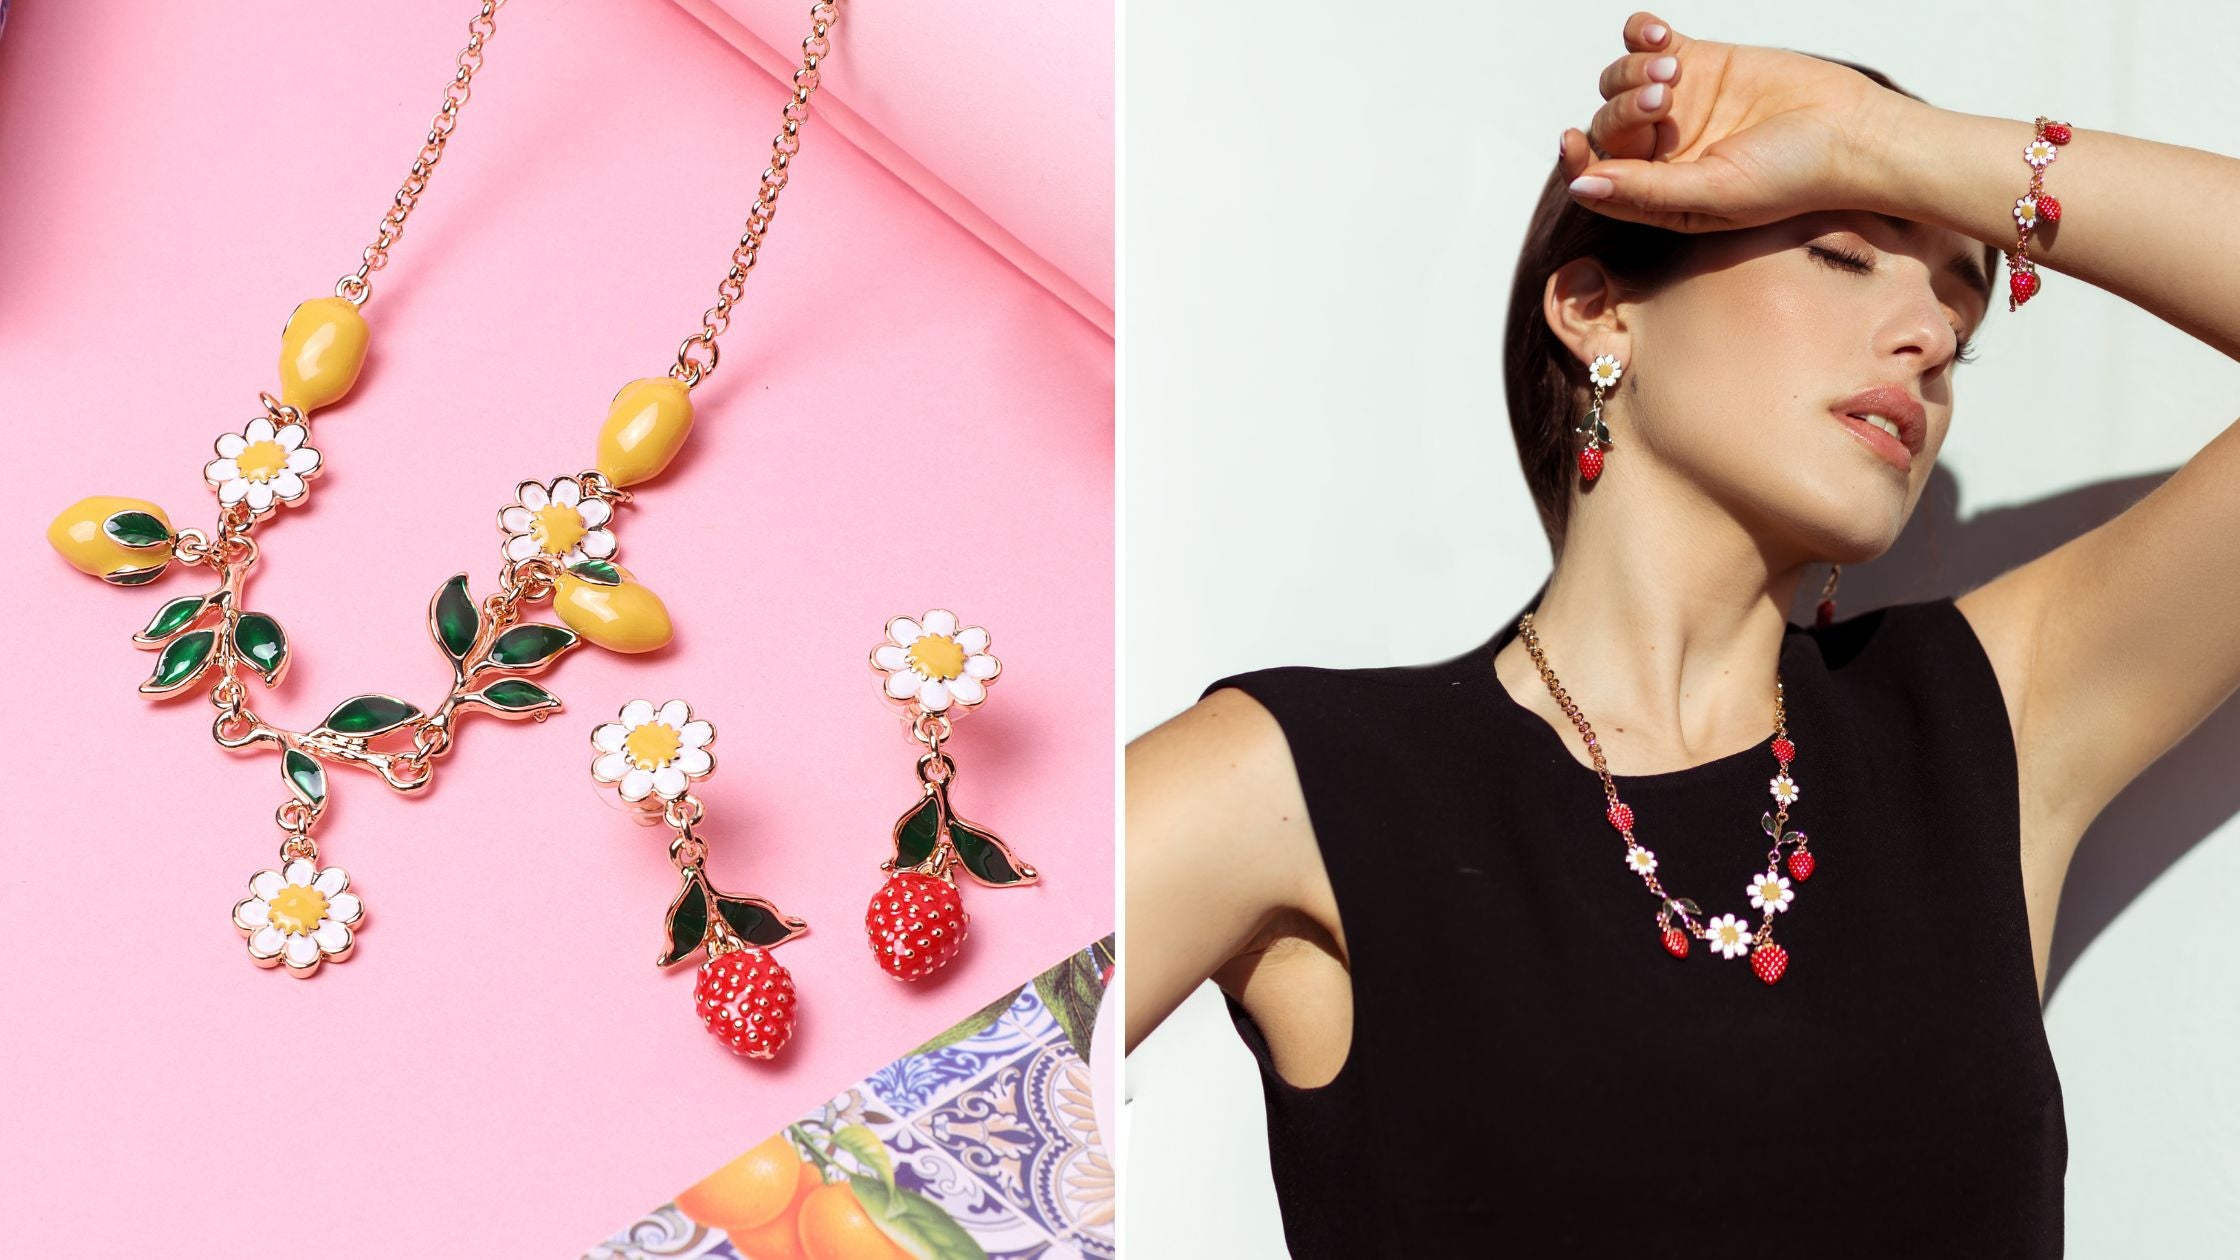 jewelry with strawberries, lemons and flowers